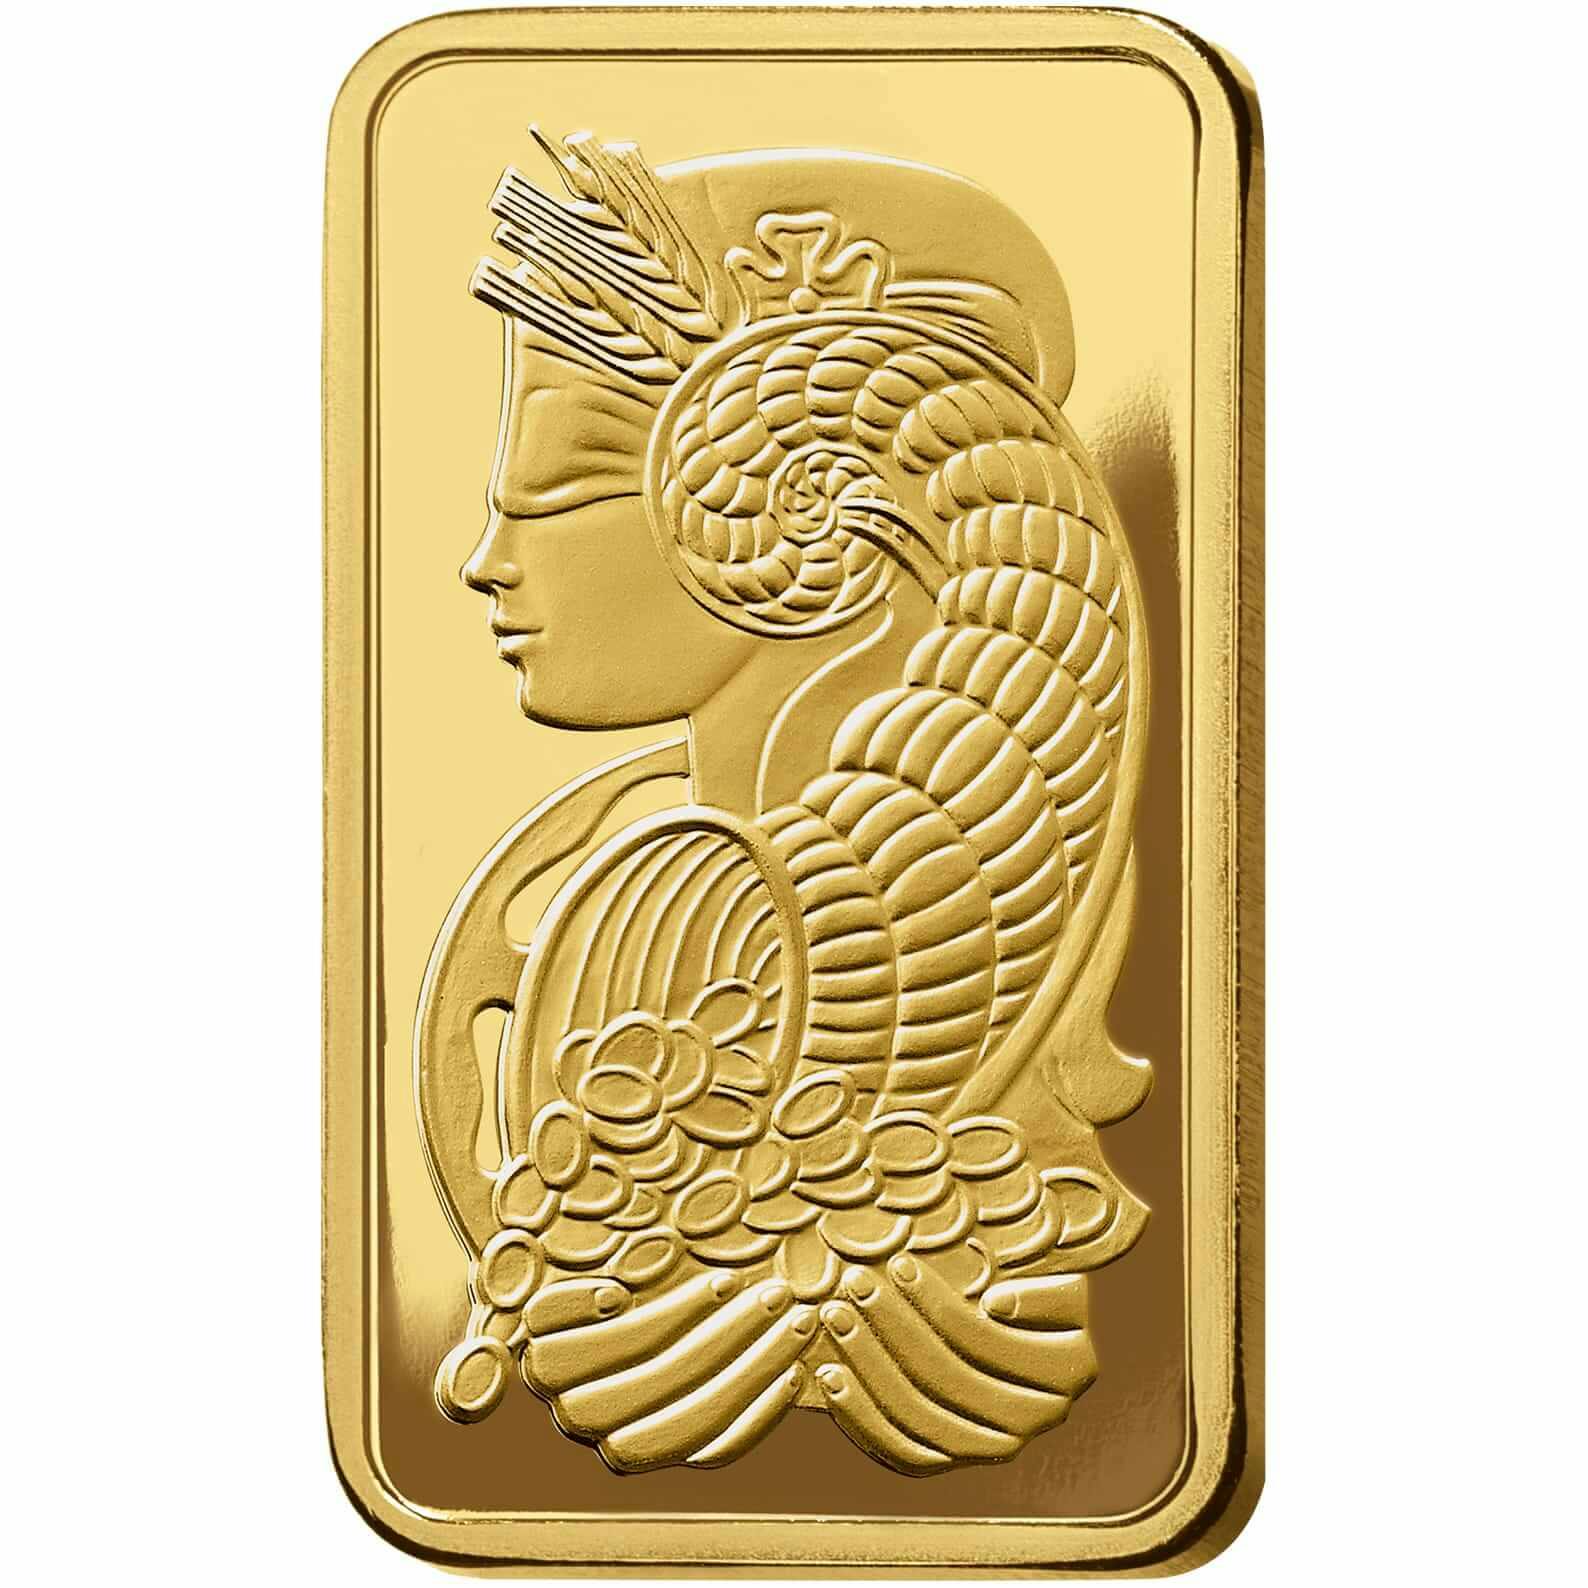 Achat d'or, 3 tolas d'or pur Lady Fortuna - PAMP Suisse - Front Veriscan